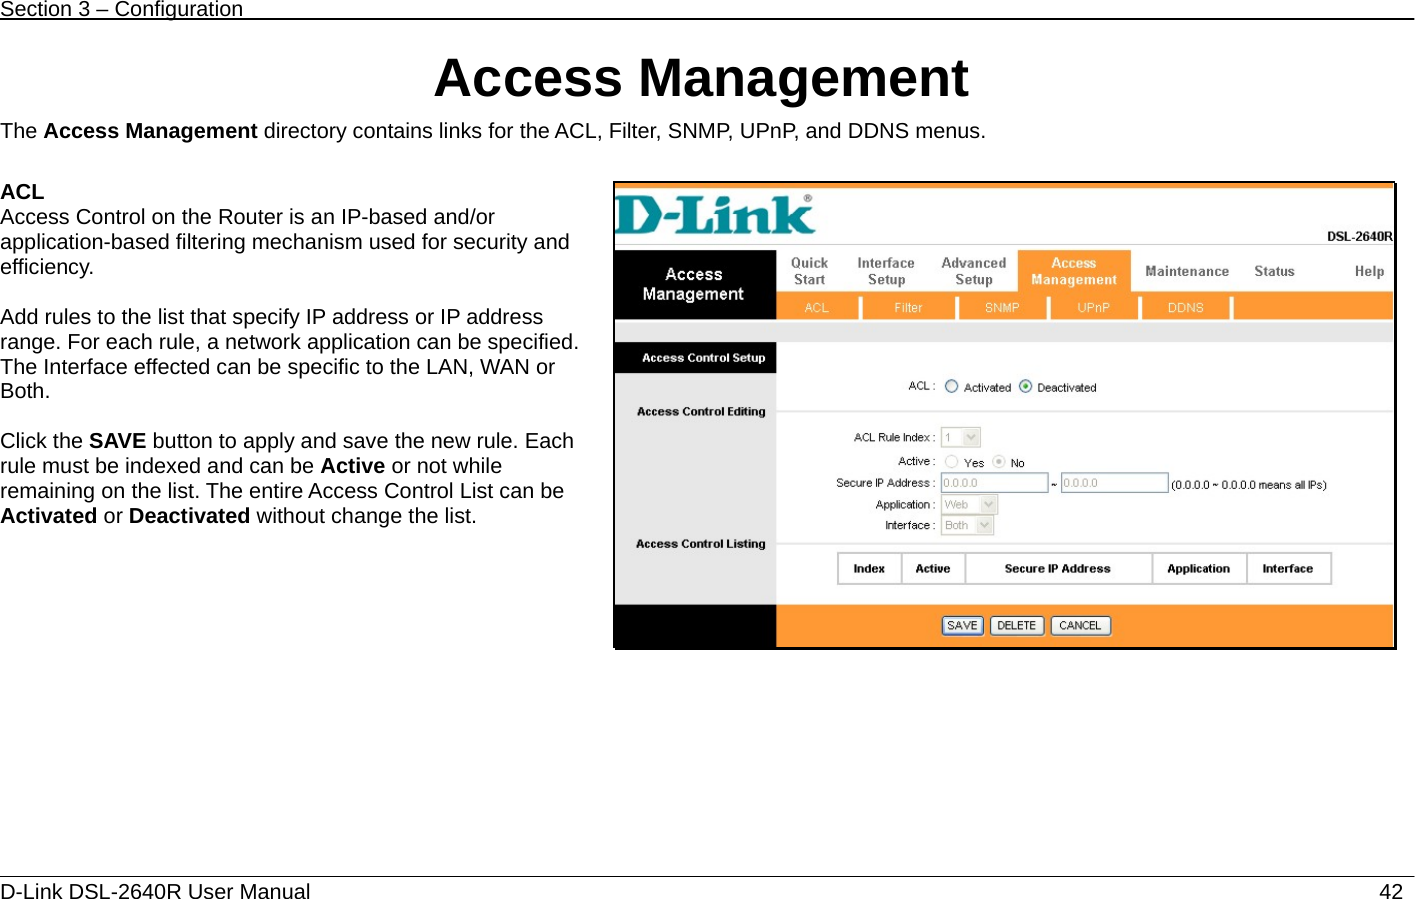 Section 3 – Configuration   D-Link DSL-2640R User Manual                           42Access Management The Access Management directory contains links for the ACL, Filter, SNMP, UPnP, and DDNS menus.  ACL Access Control on the Router is an IP-based and/or application-based filtering mechanism used for security and efficiency.  Add rules to the list that specify IP address or IP address range. For each rule, a network application can be specified. The Interface effected can be specific to the LAN, WAN or Both.  Click the SAVE button to apply and save the new rule. Each rule must be indexed and can be Active or not while remaining on the list. The entire Access Control List can be Activated or Deactivated without change the list.    